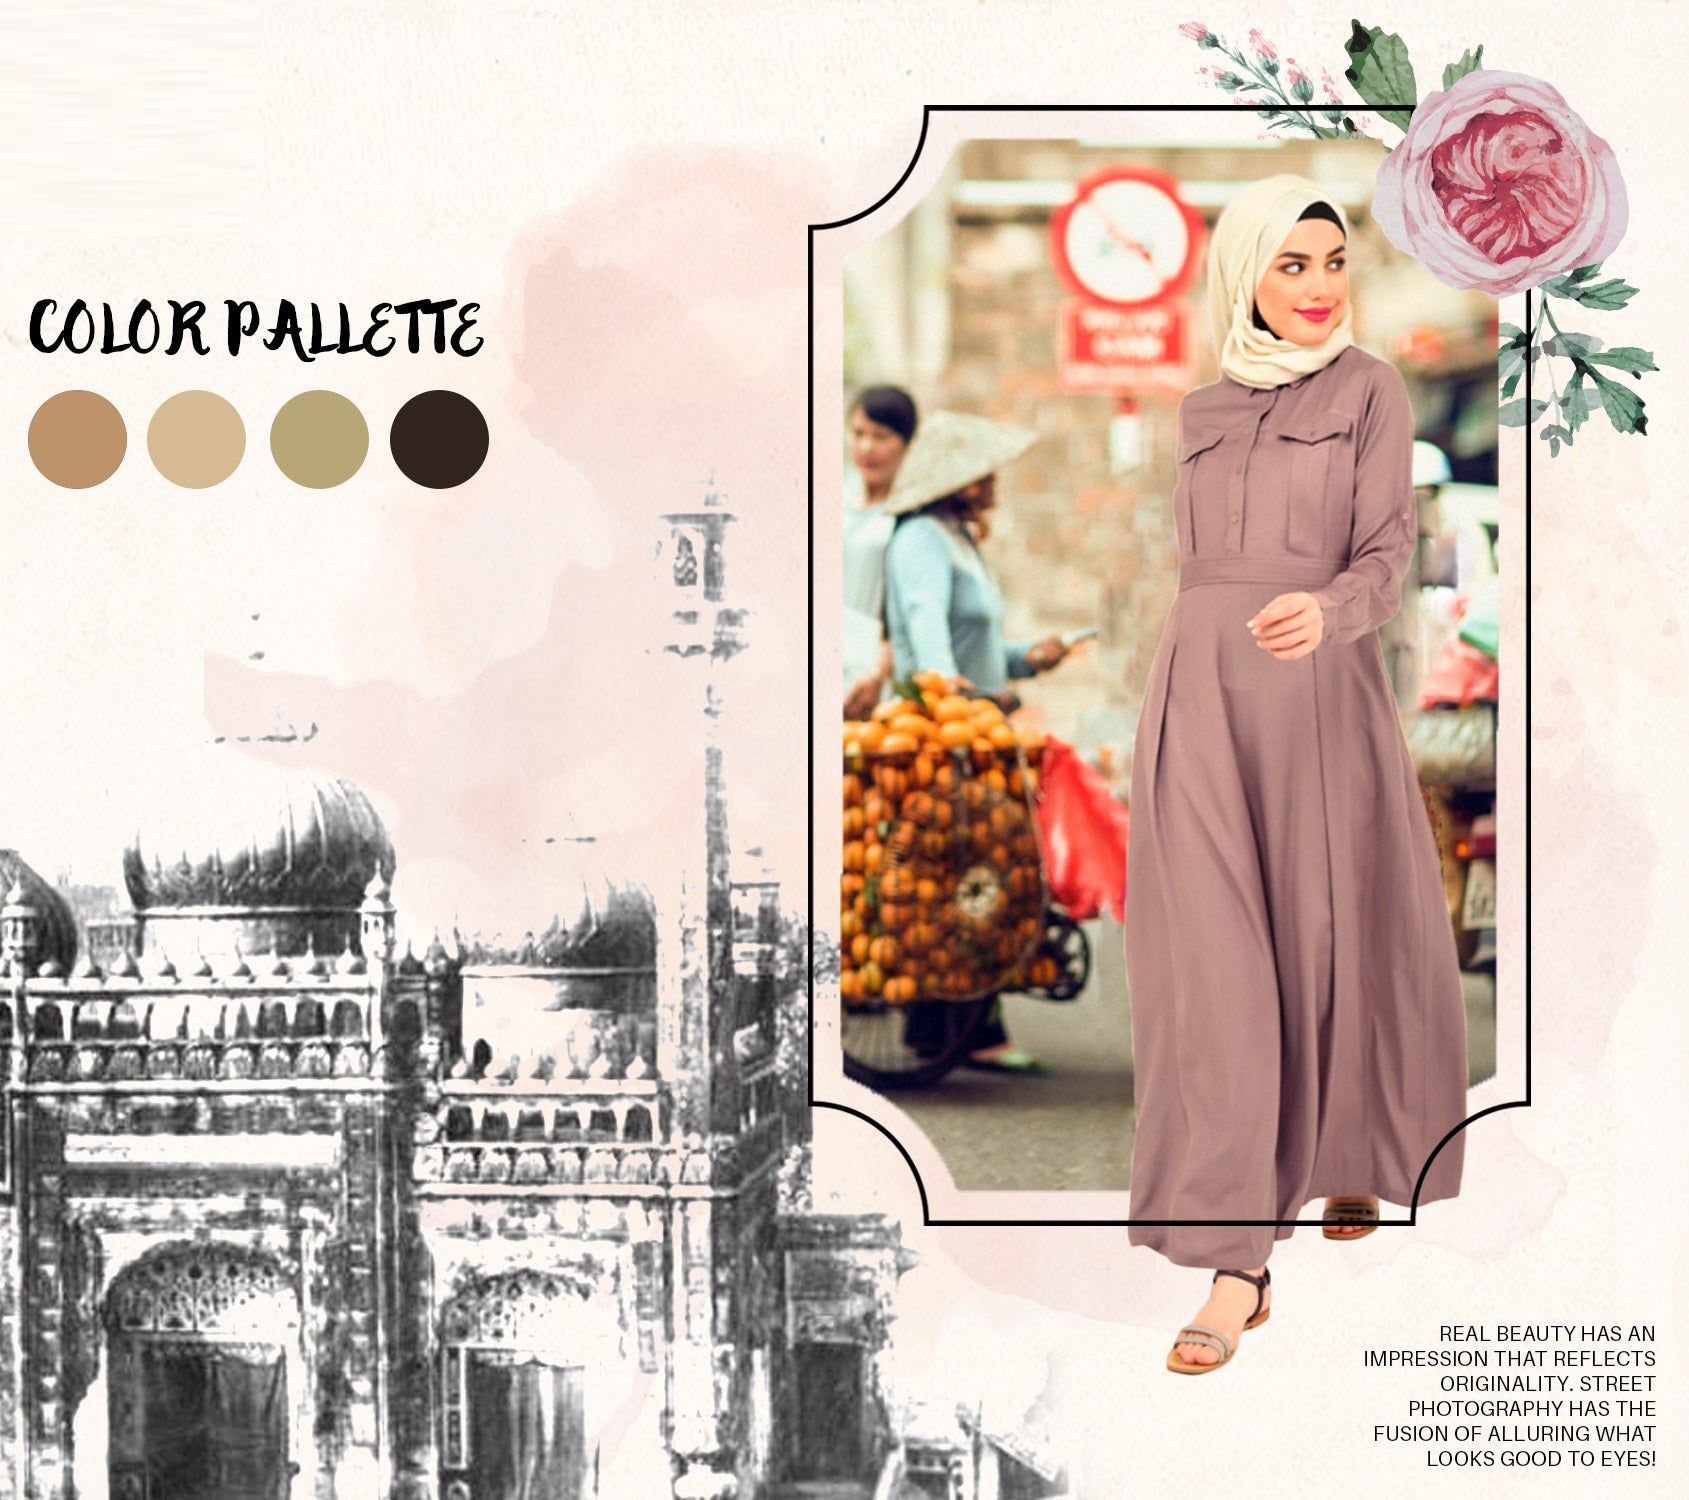 Modest Islamic Fashion with a Style